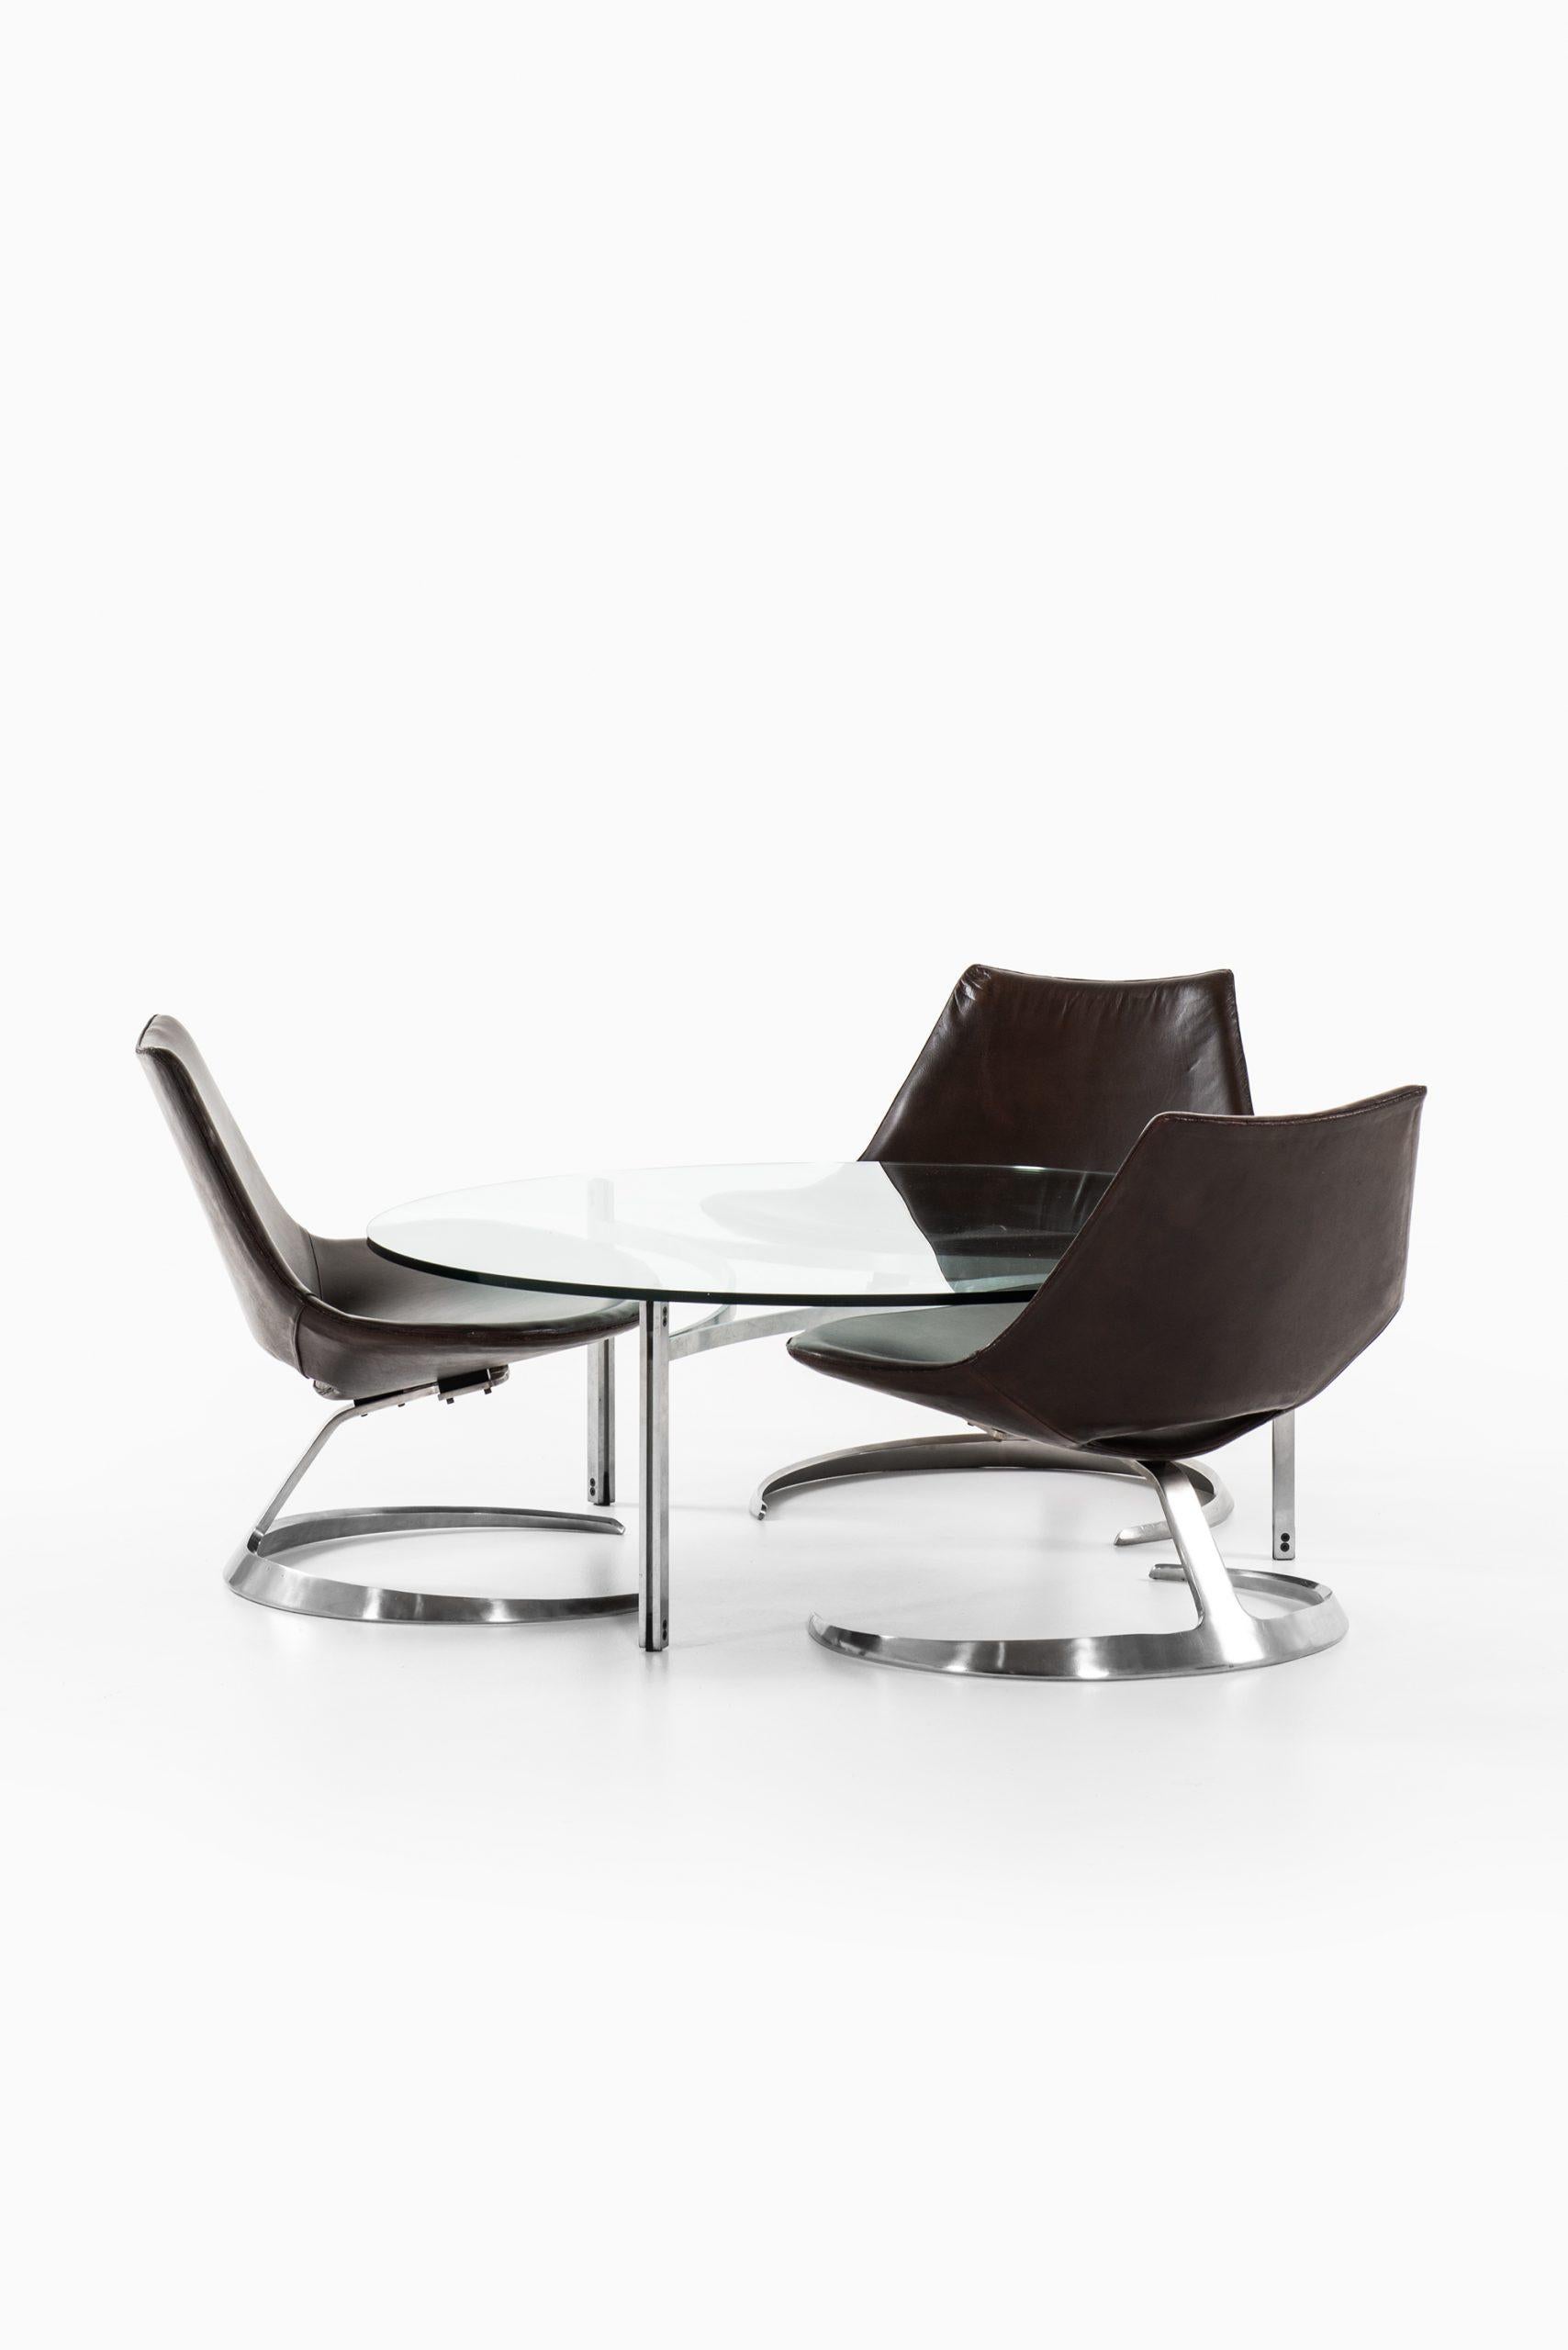 Very rare seating group model Scimitar designed by Preben Fabricius & Jørgen Kastholm.
Produced by Ivan Schlecter in Denmark.
Dimensions table (W x D x H): 120 x 120 x 42.5 cm.
Dimensions chairs (W x D x H): 82 x 65 x 65 cm, SH 35 cm.